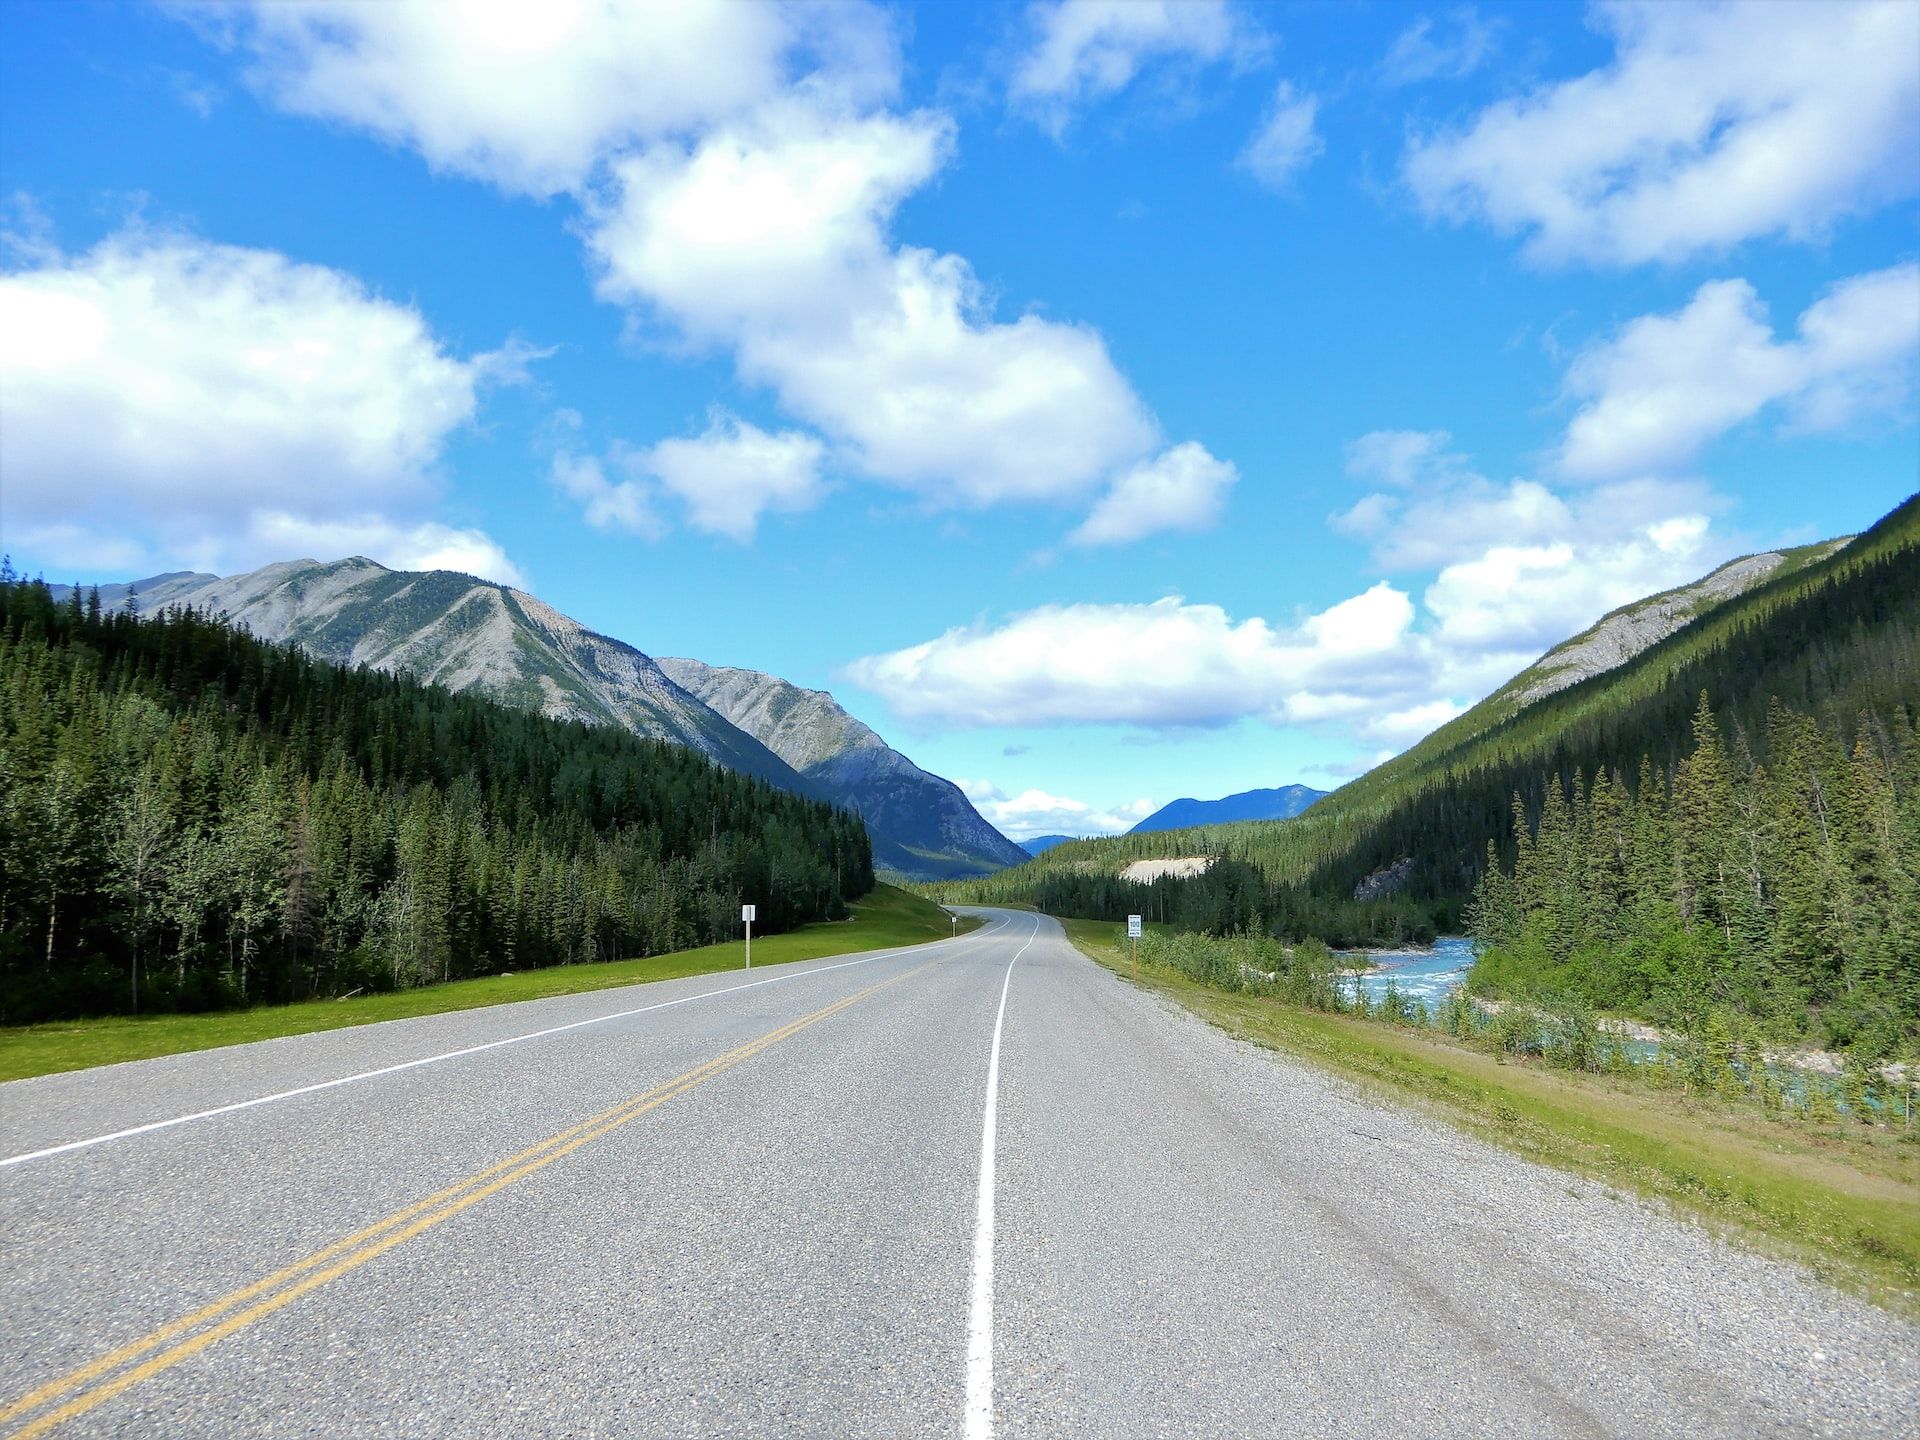 The Alaska highway zipping through the picturesque landscape